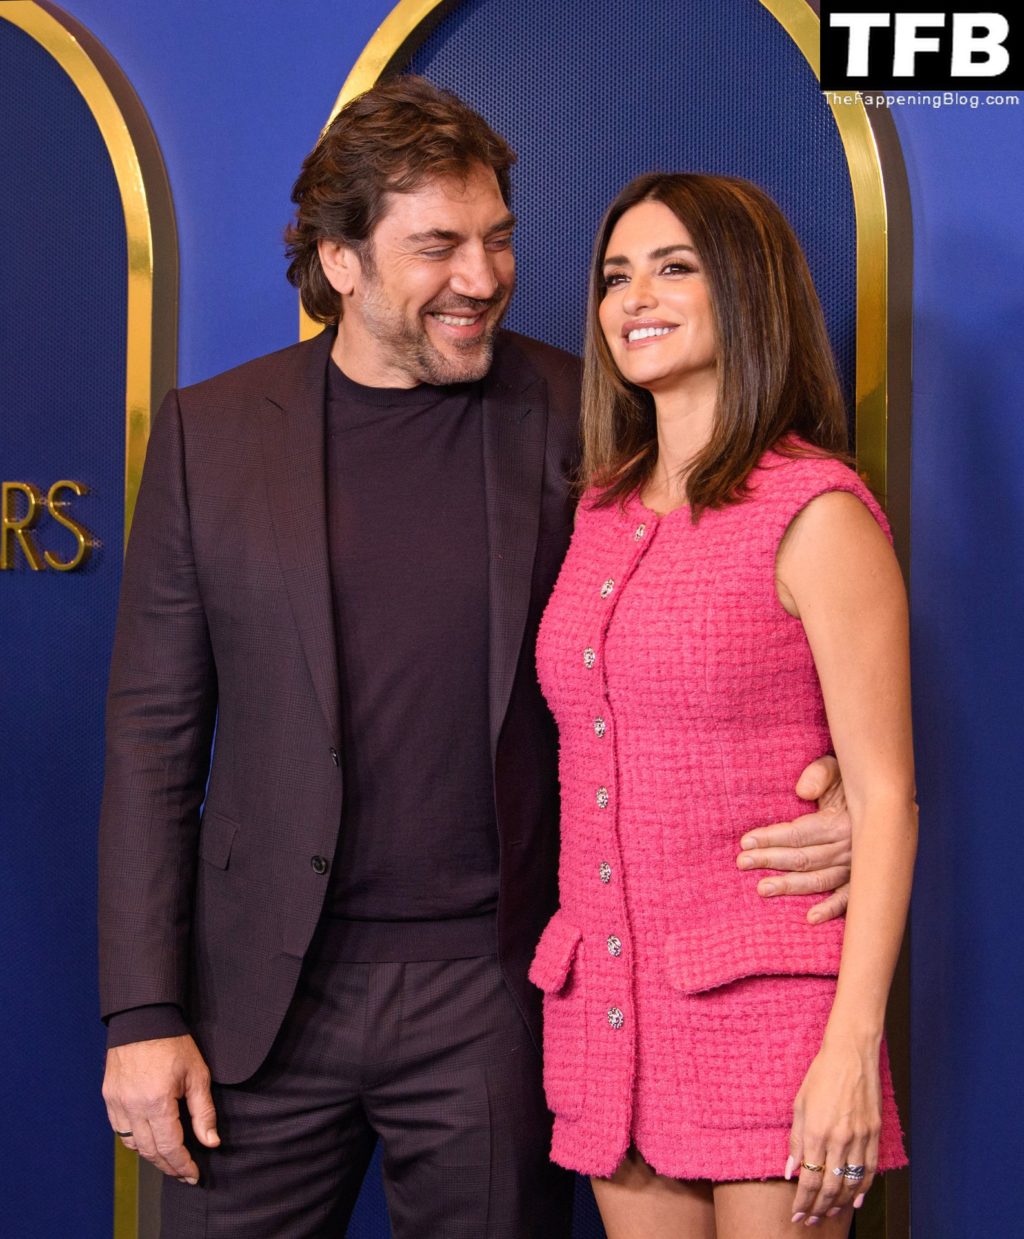 Penelope Cruz Flaunts Her Sexy Legs at the 94th Oscars Nominees Luncheon (49 Photos)